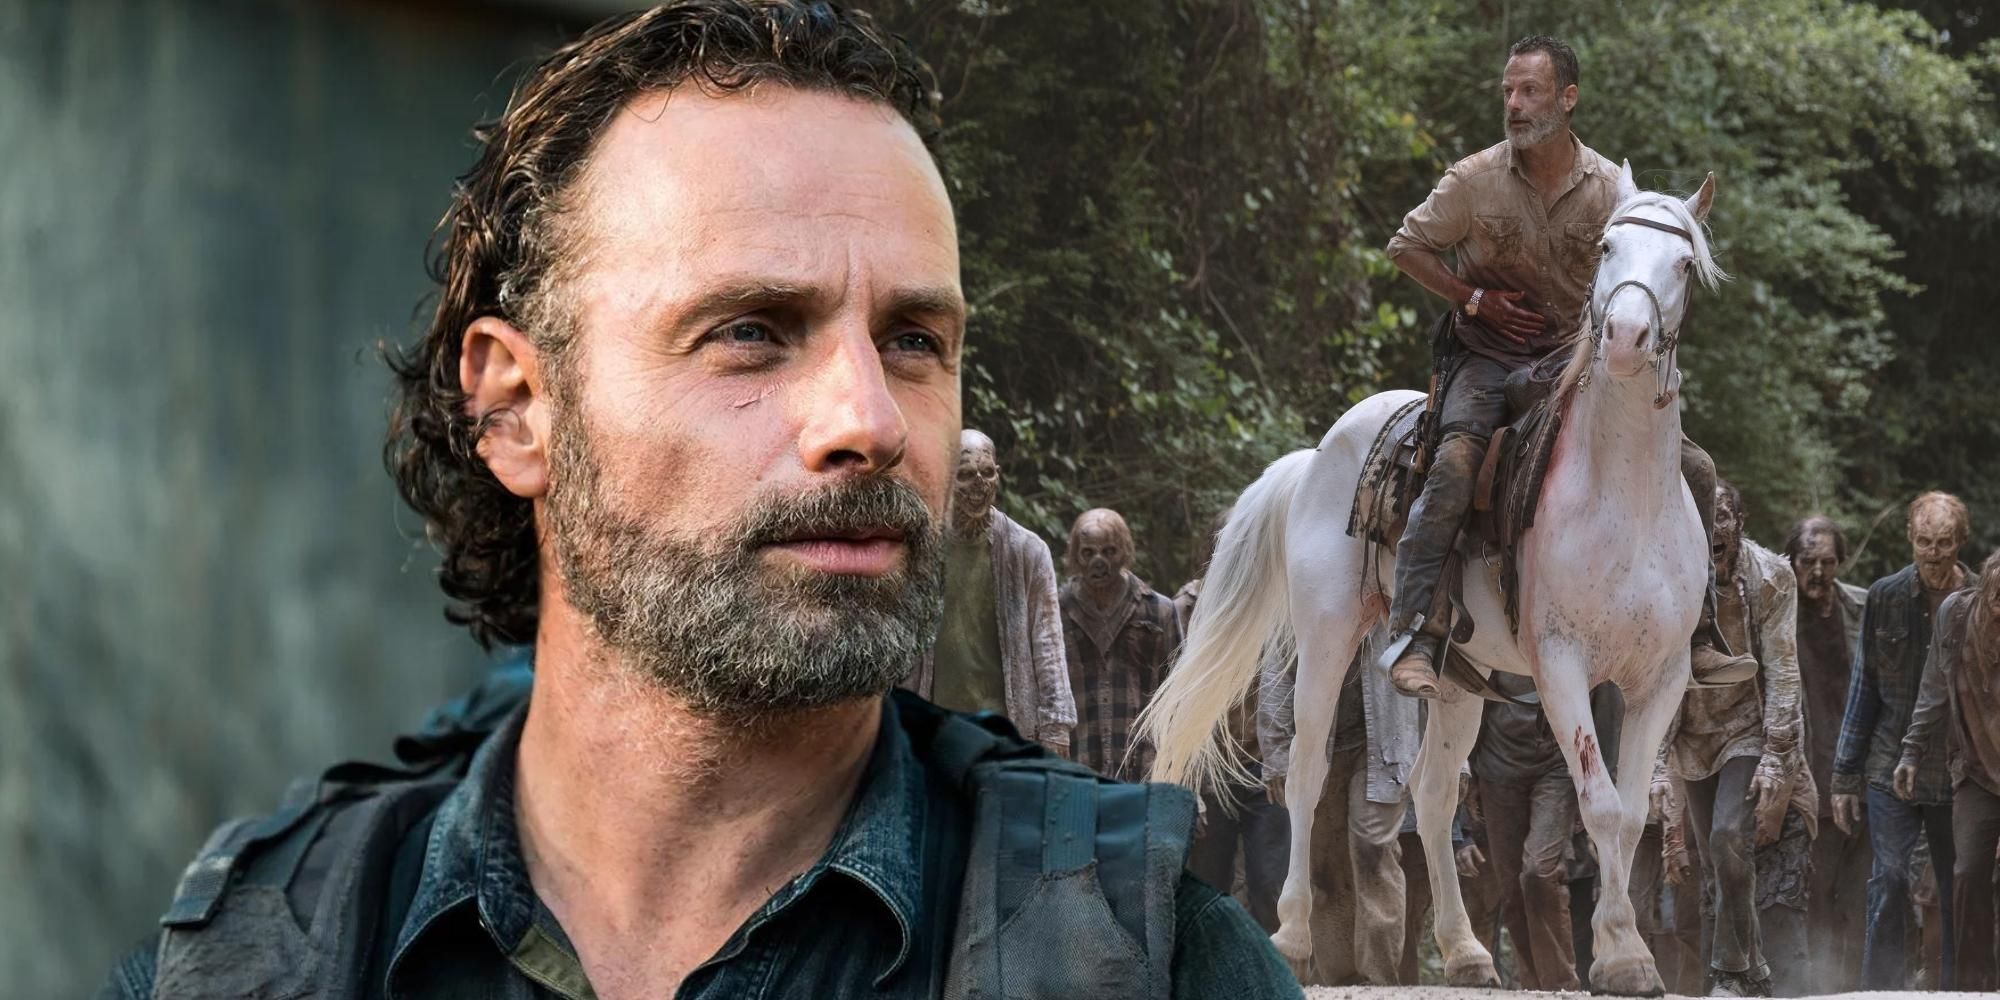 Walking Dead’s Rick Grimes Movie News & Updates: Everything We Know